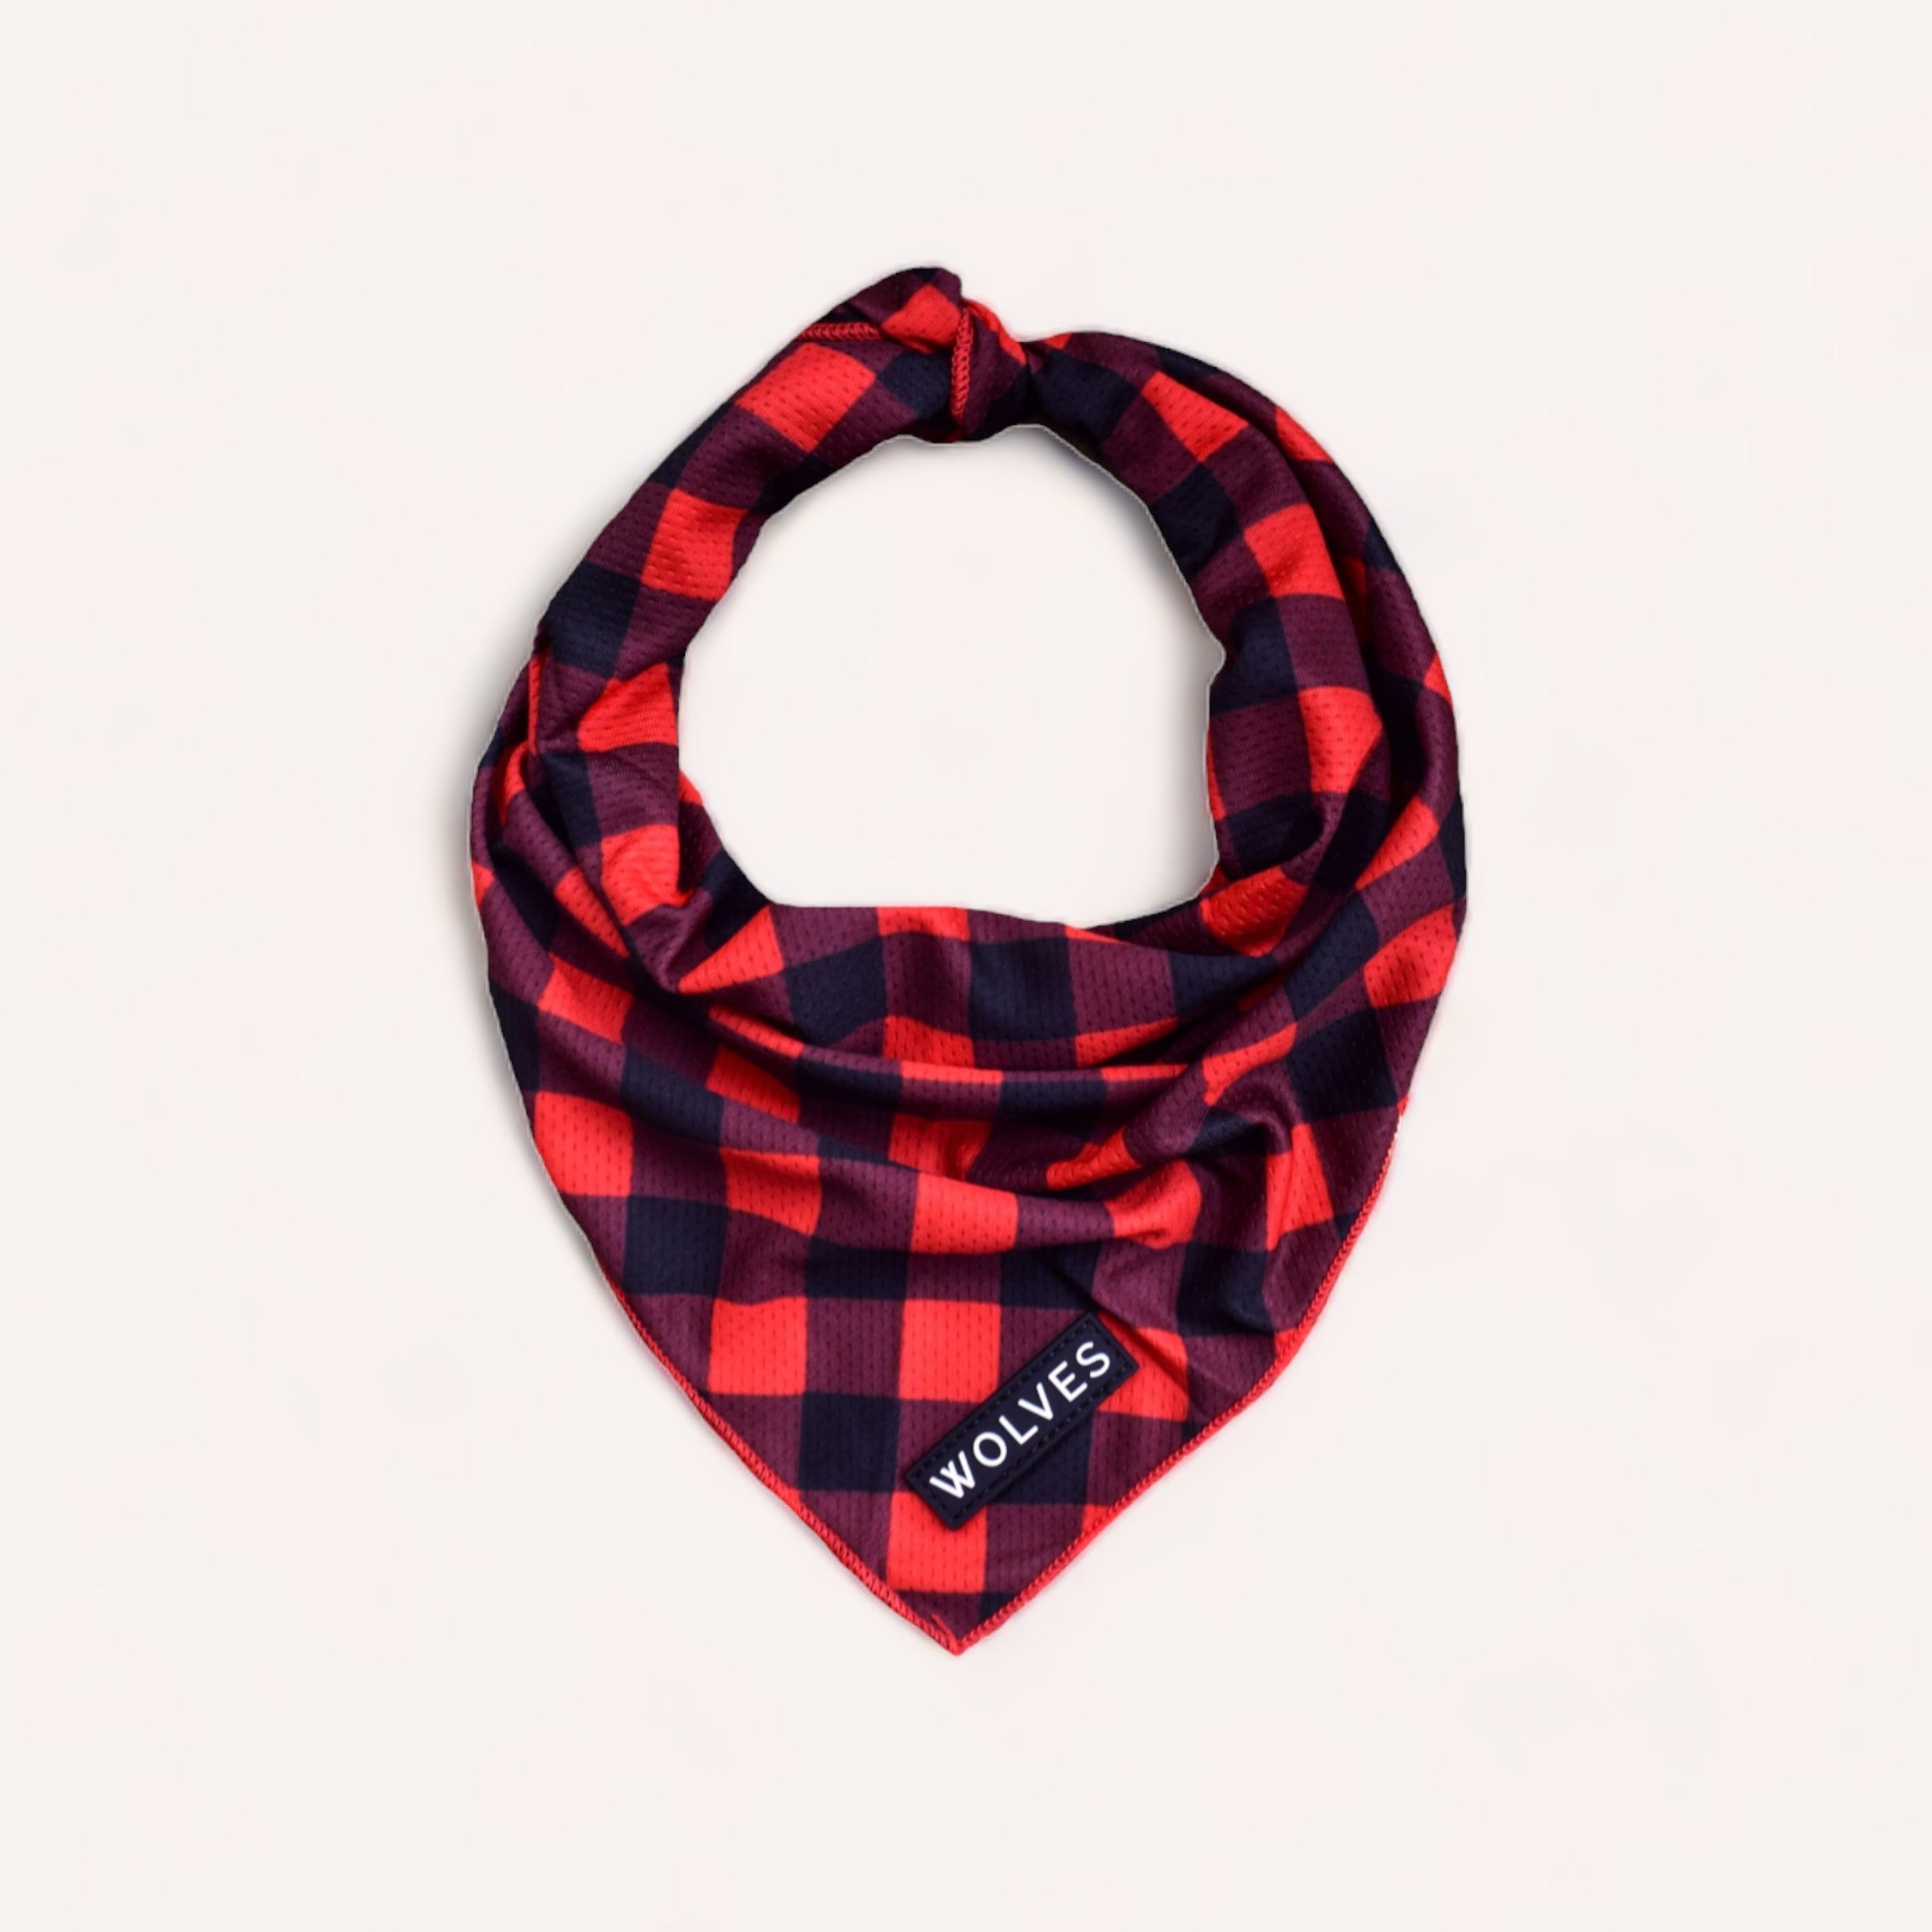 A Buffalo Bandana by Wolves of Wellington, a red and black checkered, wrinkle-free bandana with the word "wolves" embroidered at one corner, neatly folded into a triangle and placed against a pale background, perfect for dog band.